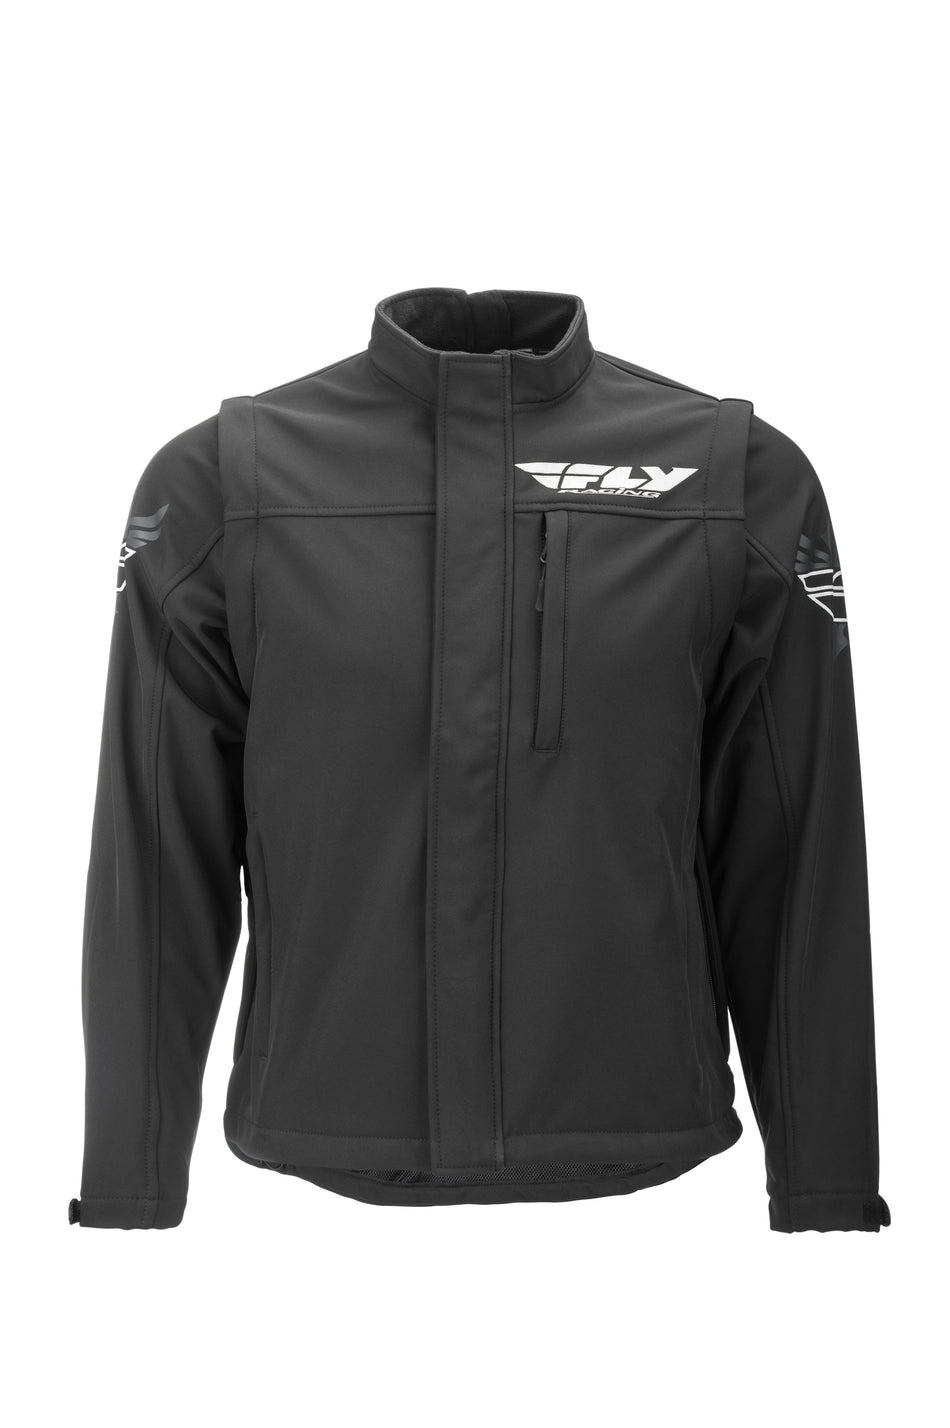 FLY RACING Fly Black Ops Convertible Jacket Black Lg 354-6060L